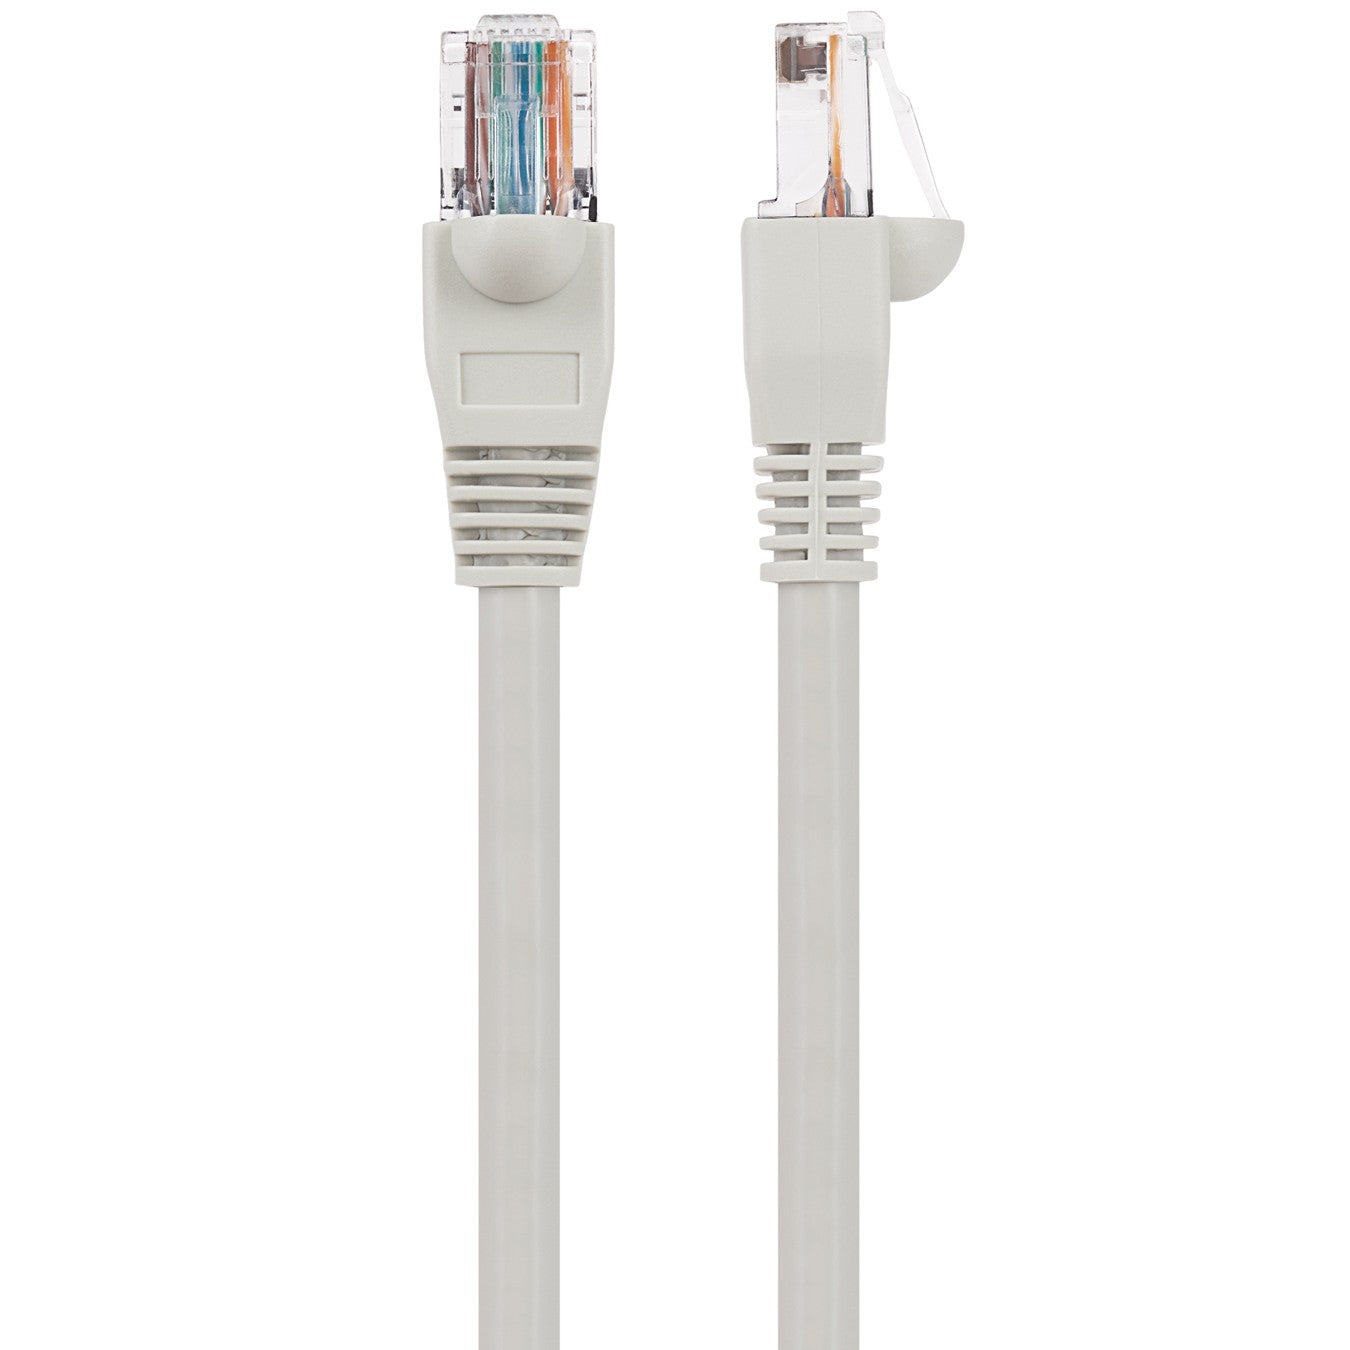 Maplin CAT6 RJ45 Ethernet Cable - Grey, 10m, Cables, Maplin